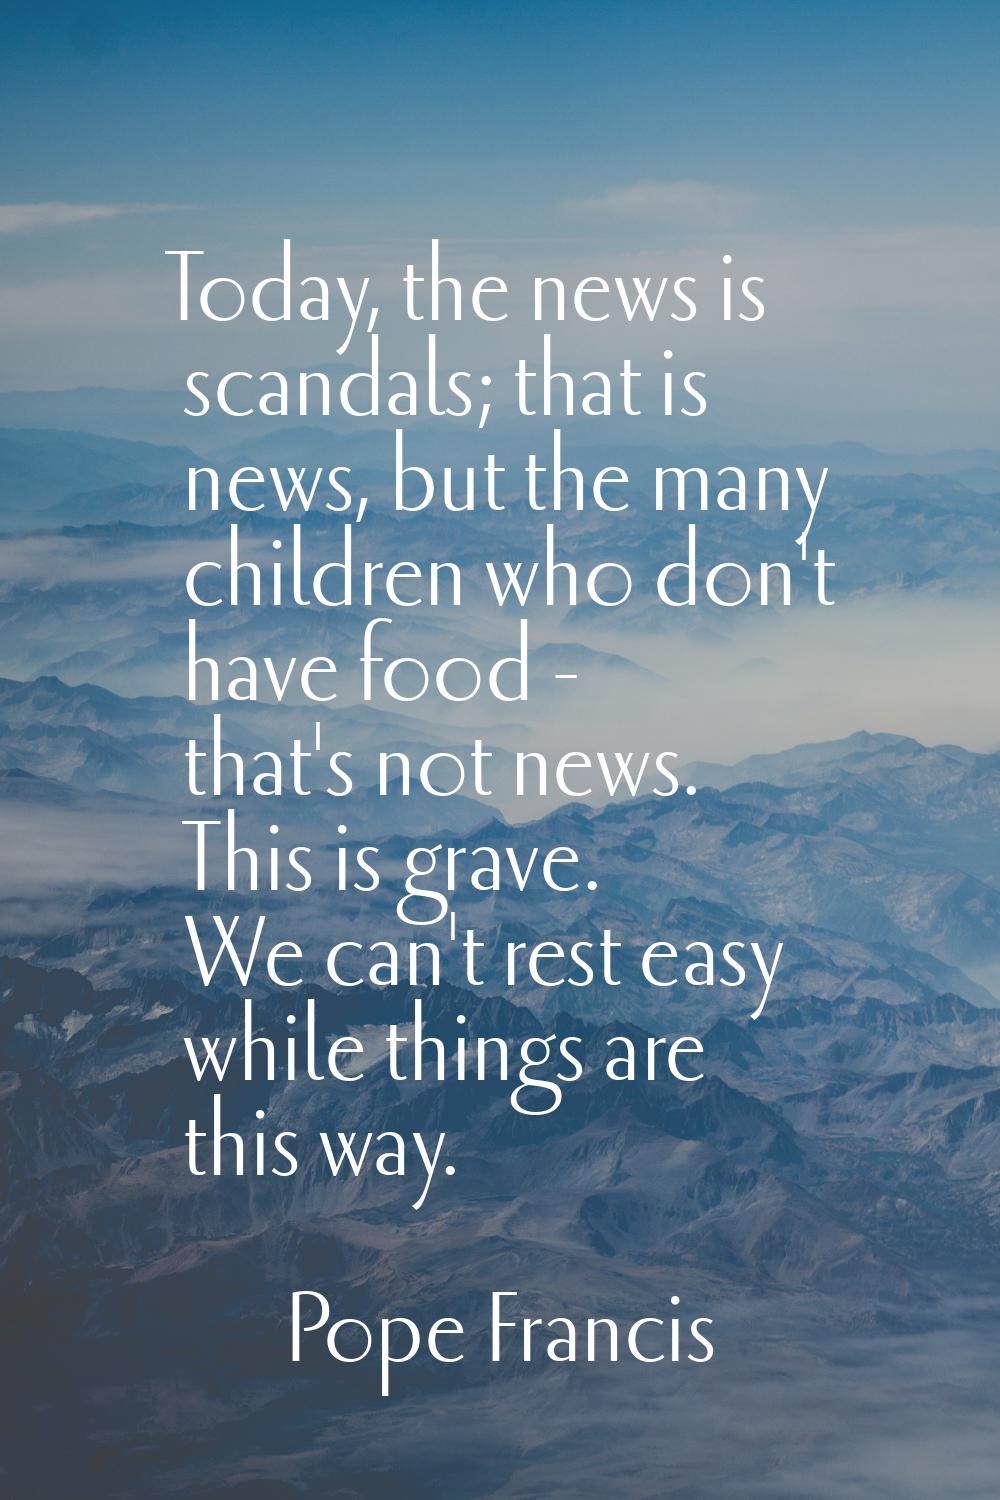 Today, the news is scandals; that is news, but the many children who don't have food - that's not n